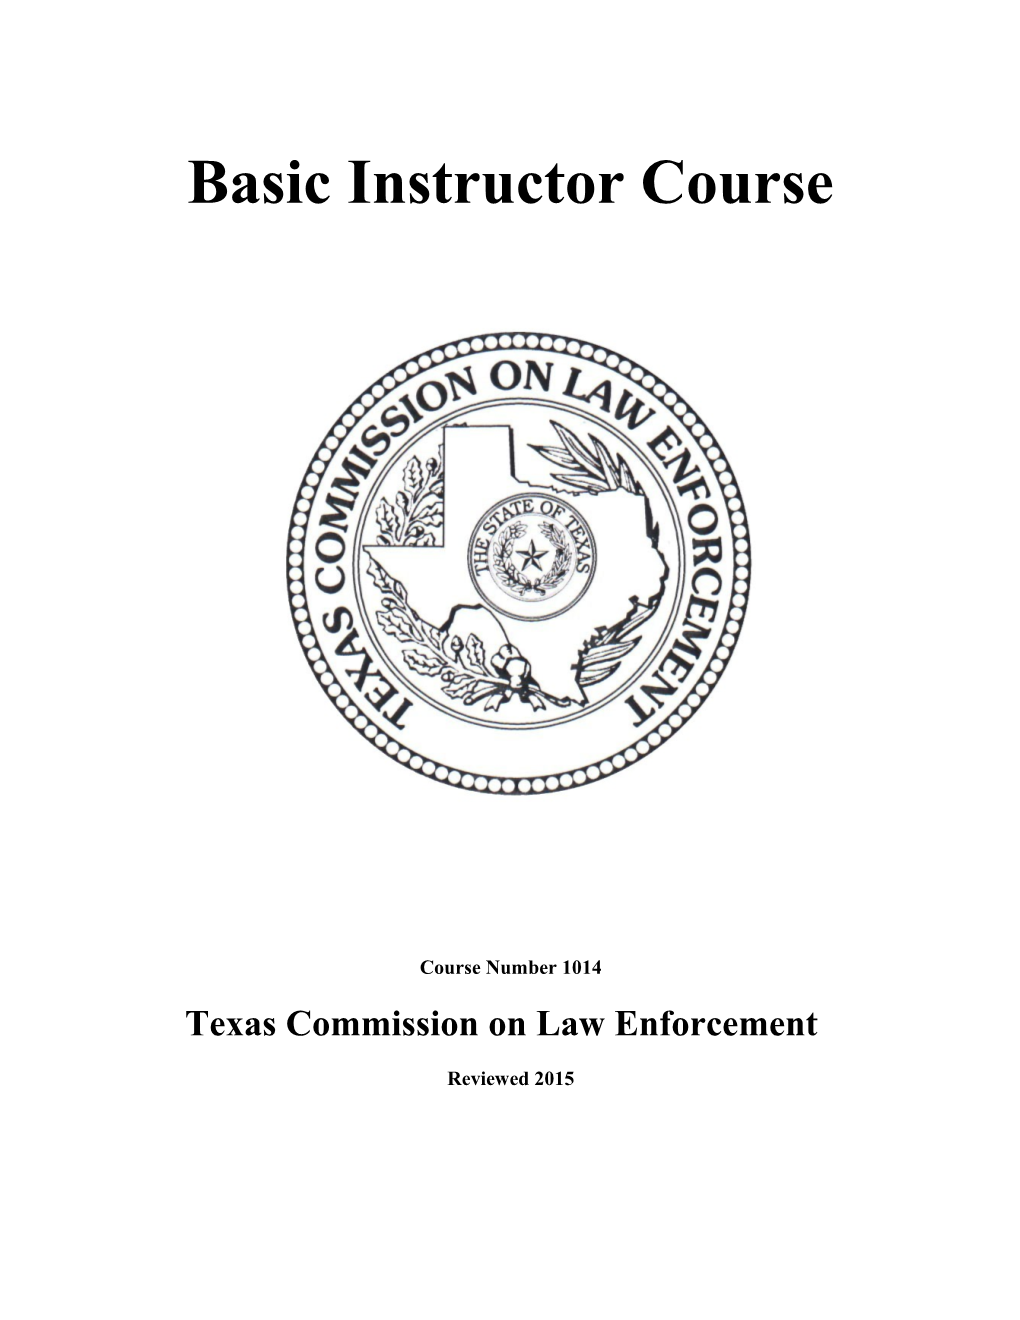 Basic Instructor Certification Course